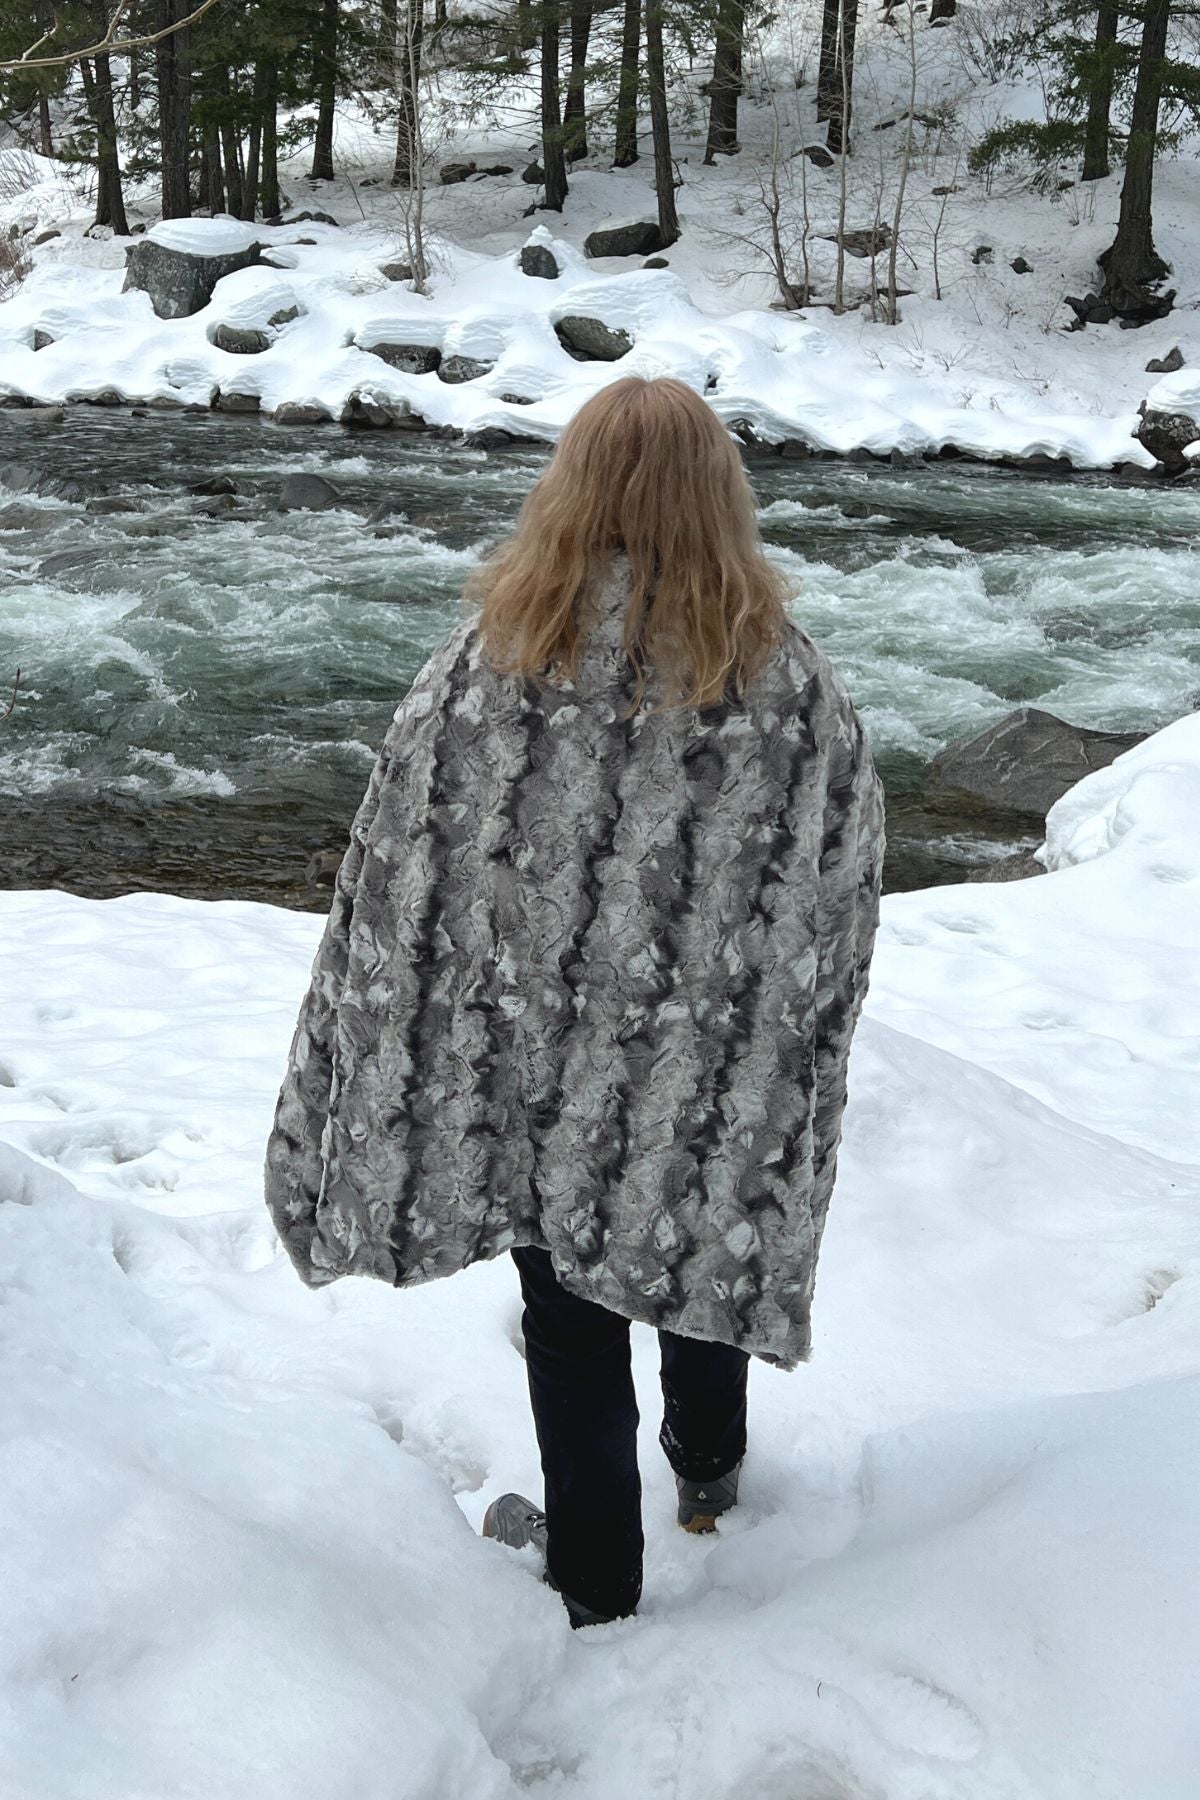 Throw Blanket on Woman Standing by Rapids | White Water Luxury Faux Fur | Handmade in WA, USA by Pandemonium Seattle